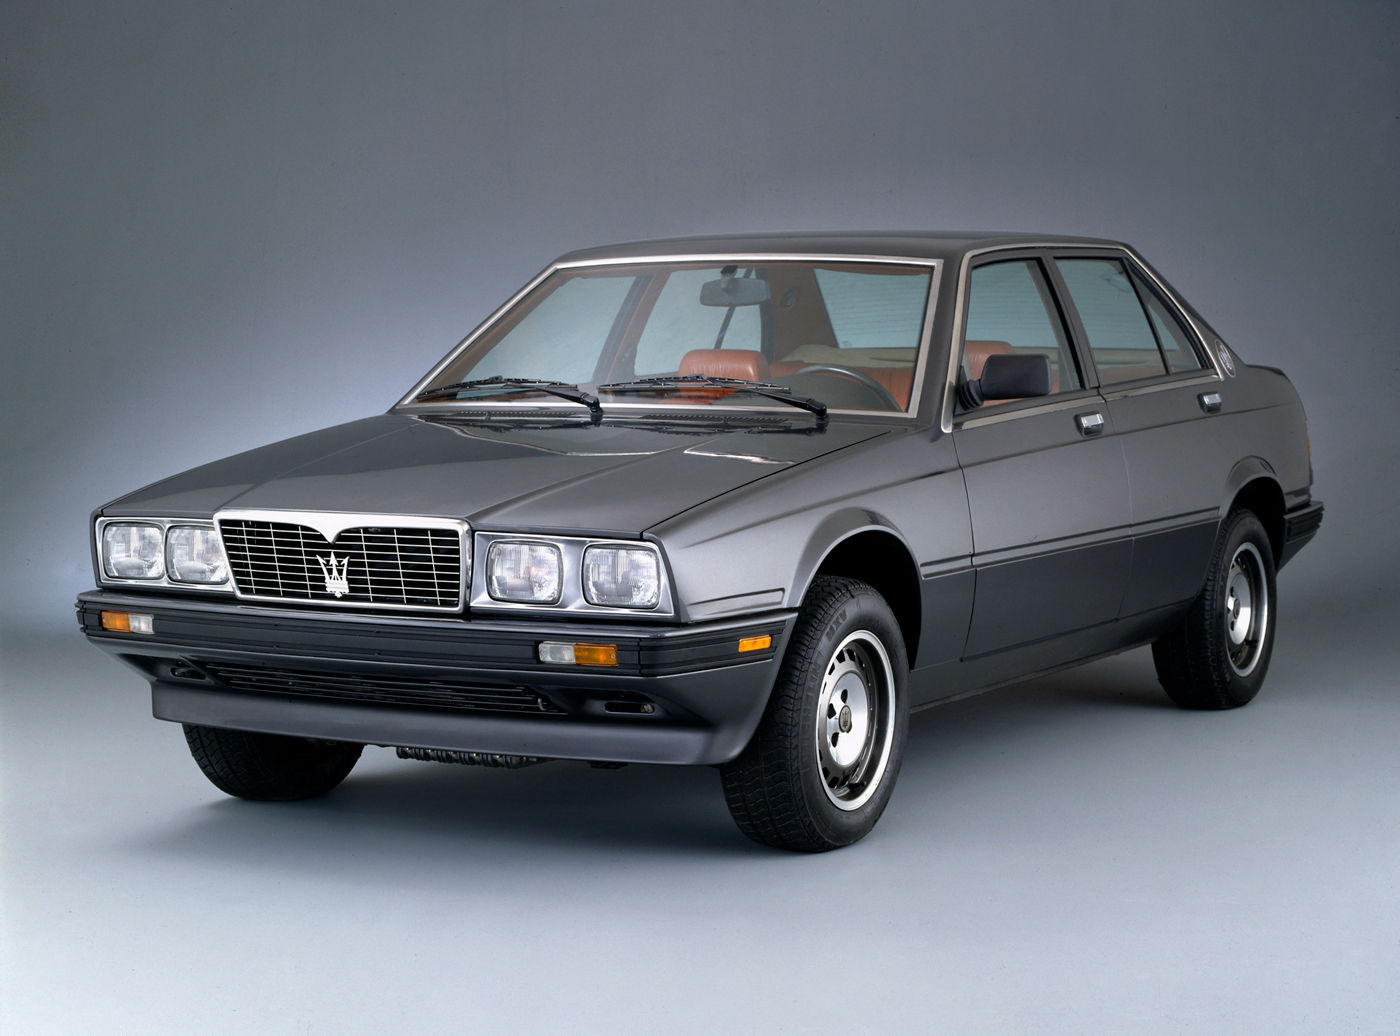 1985 Maserati 420 - overview of a gray classic car model